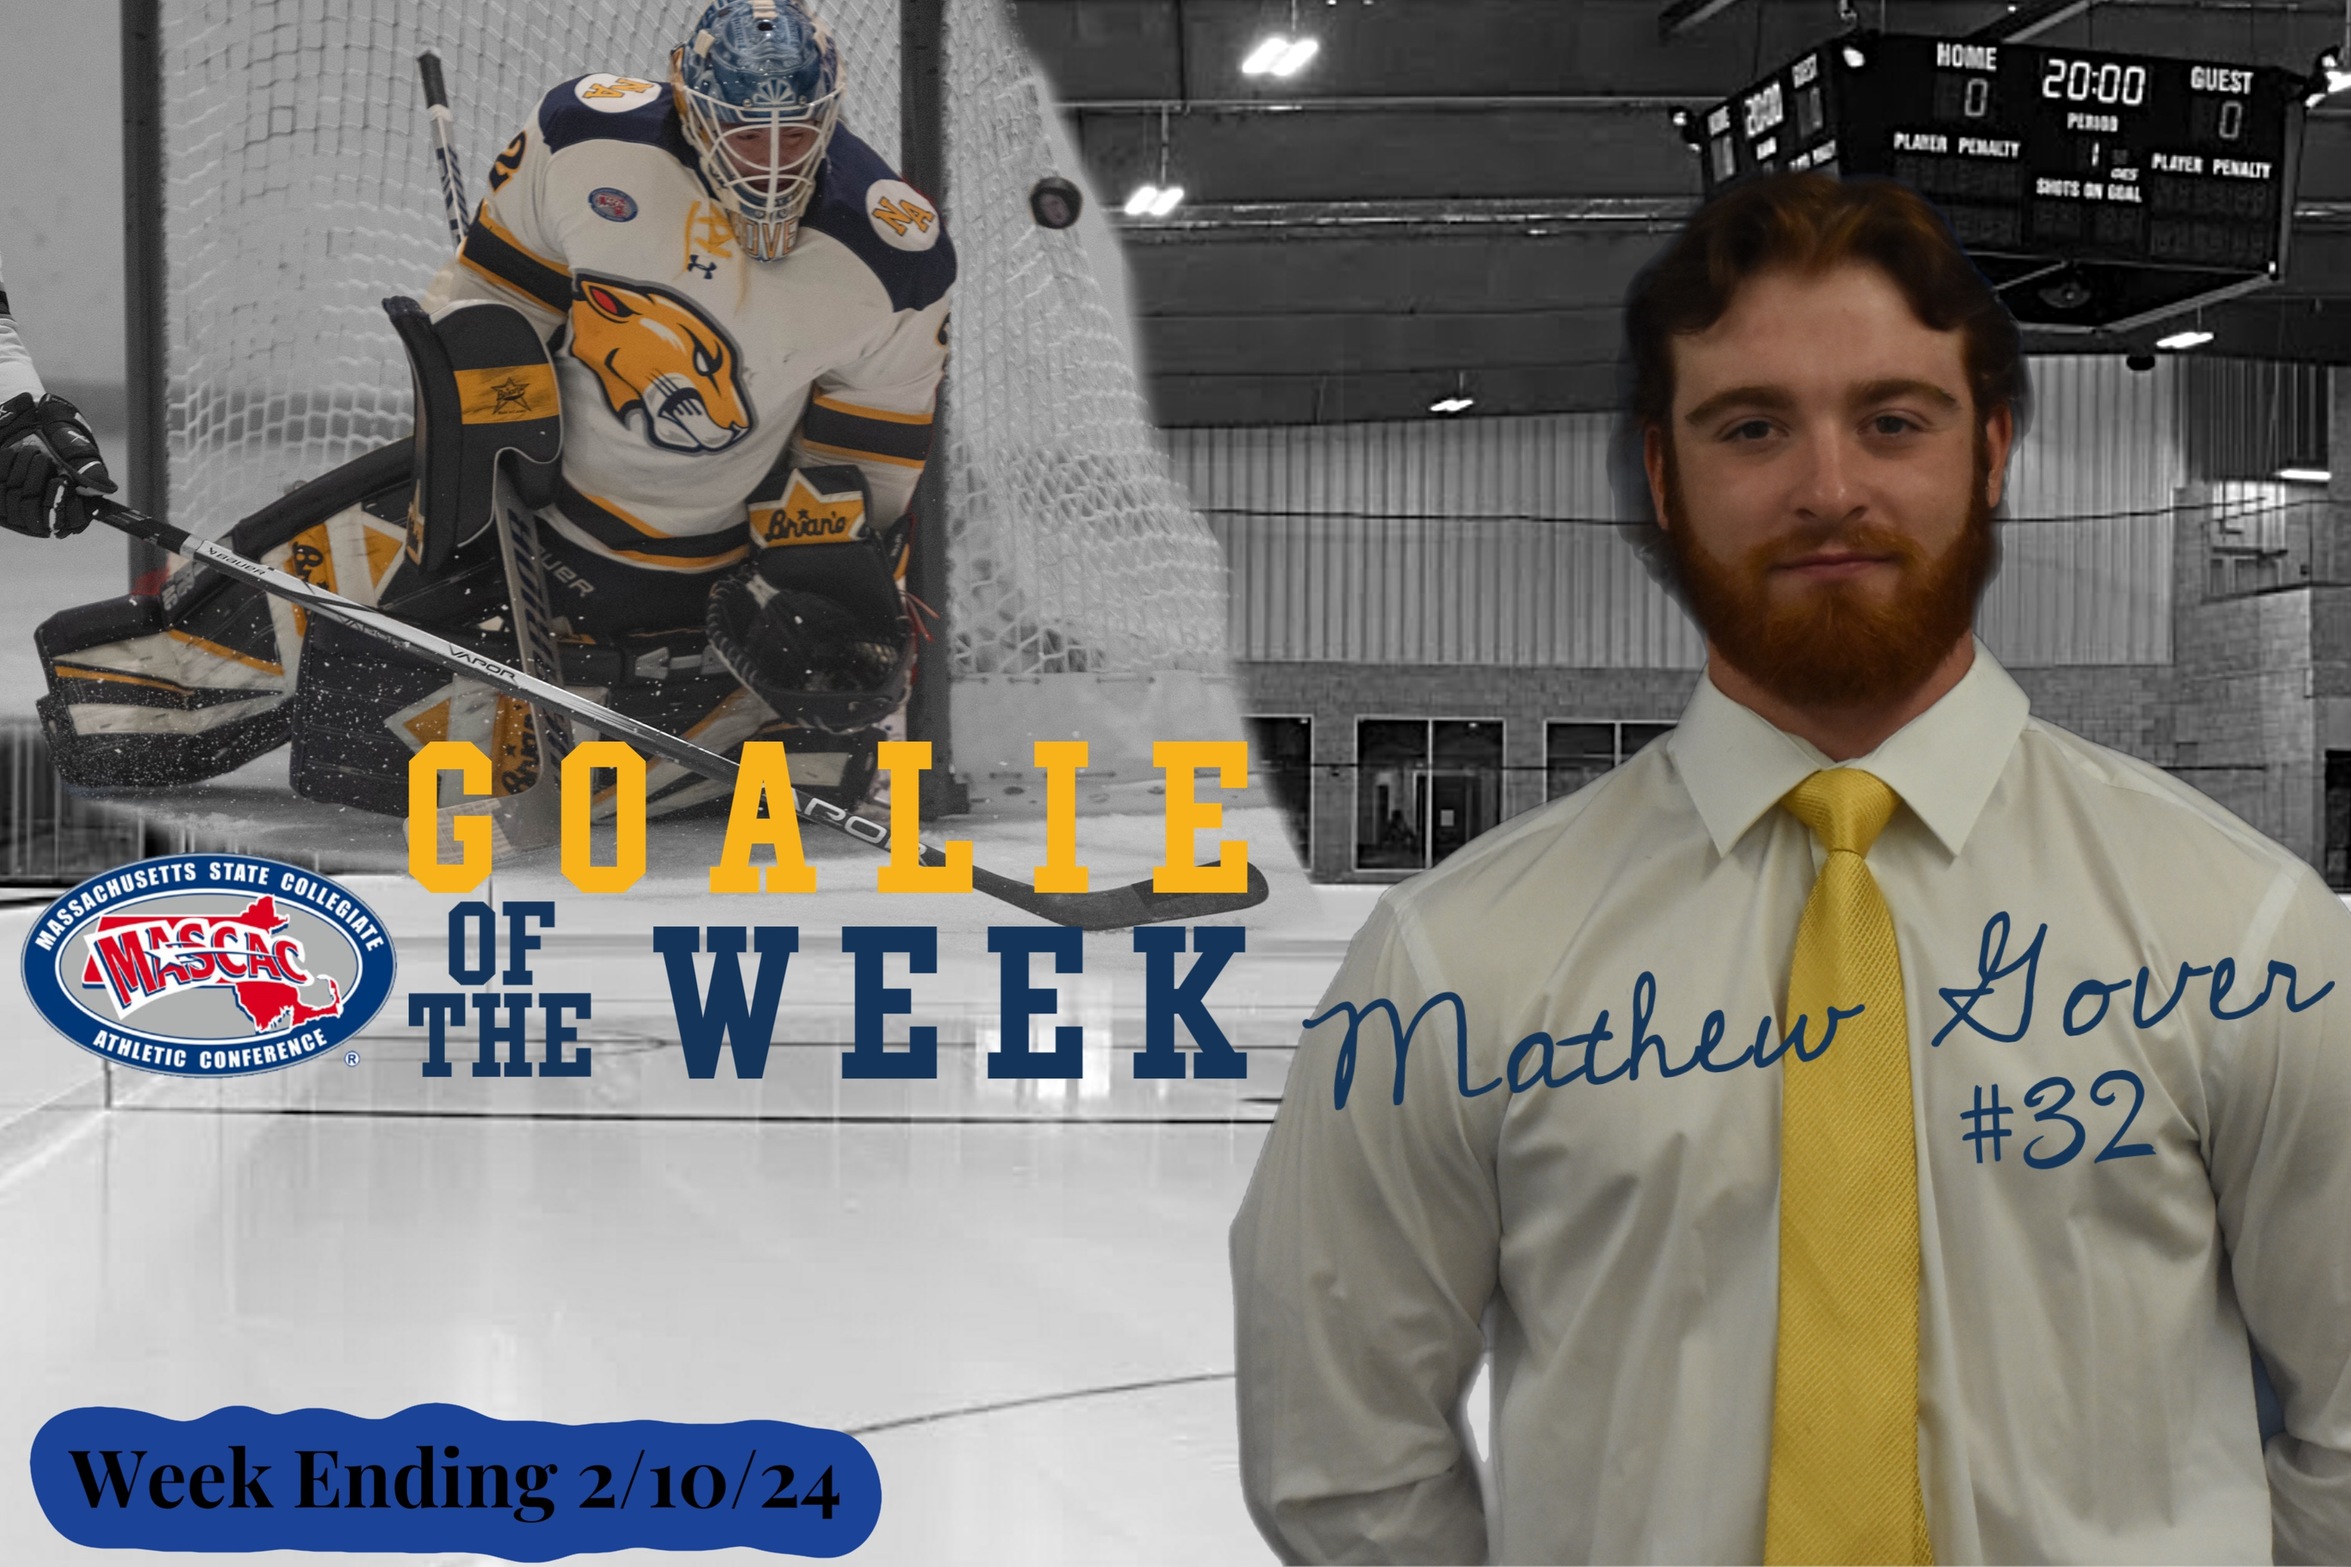 Gover earns MASCAC Goalie of the Week